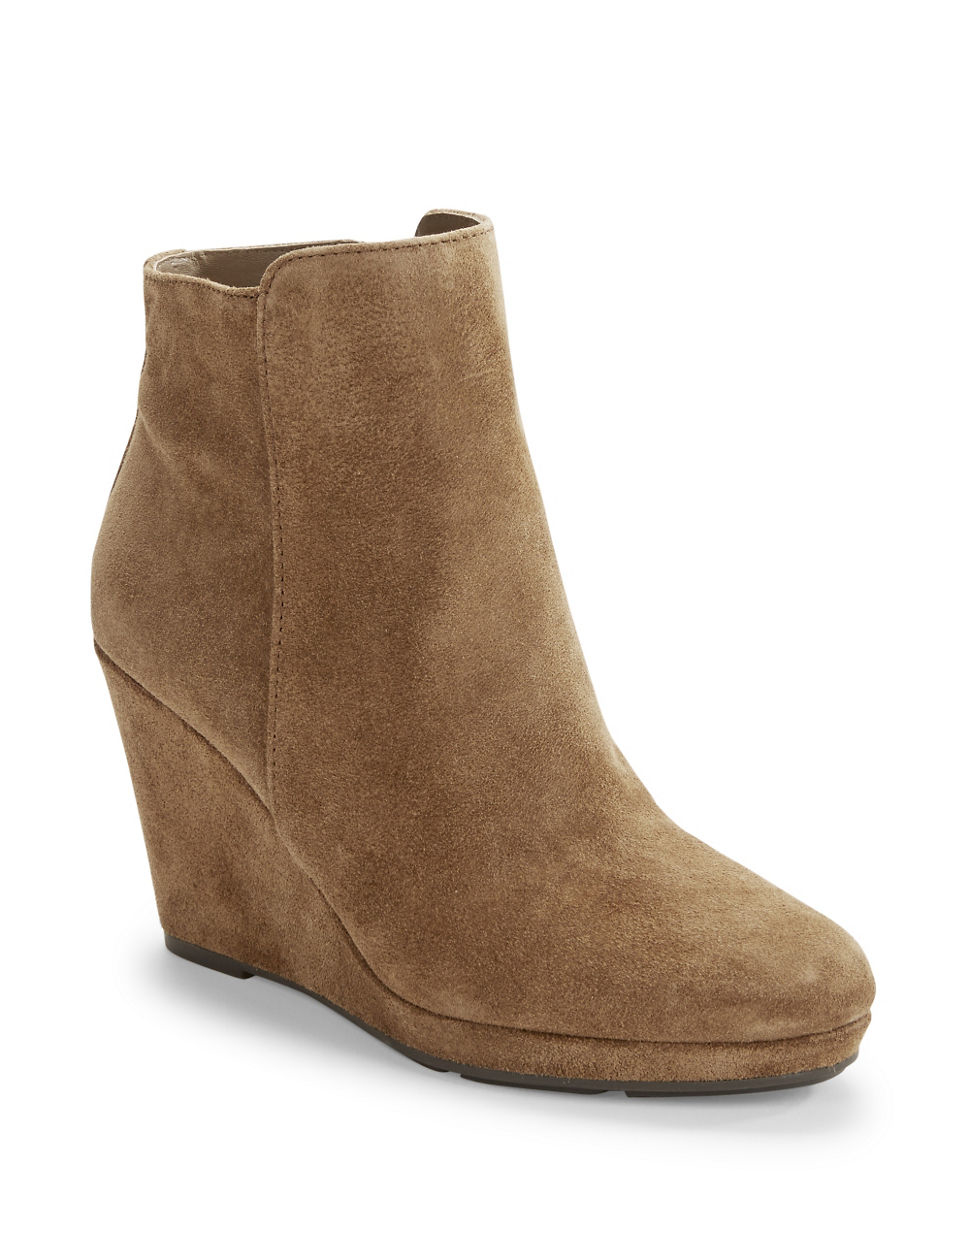 Via spiga Darina Wedge Ankle Boots in Natural | Lyst